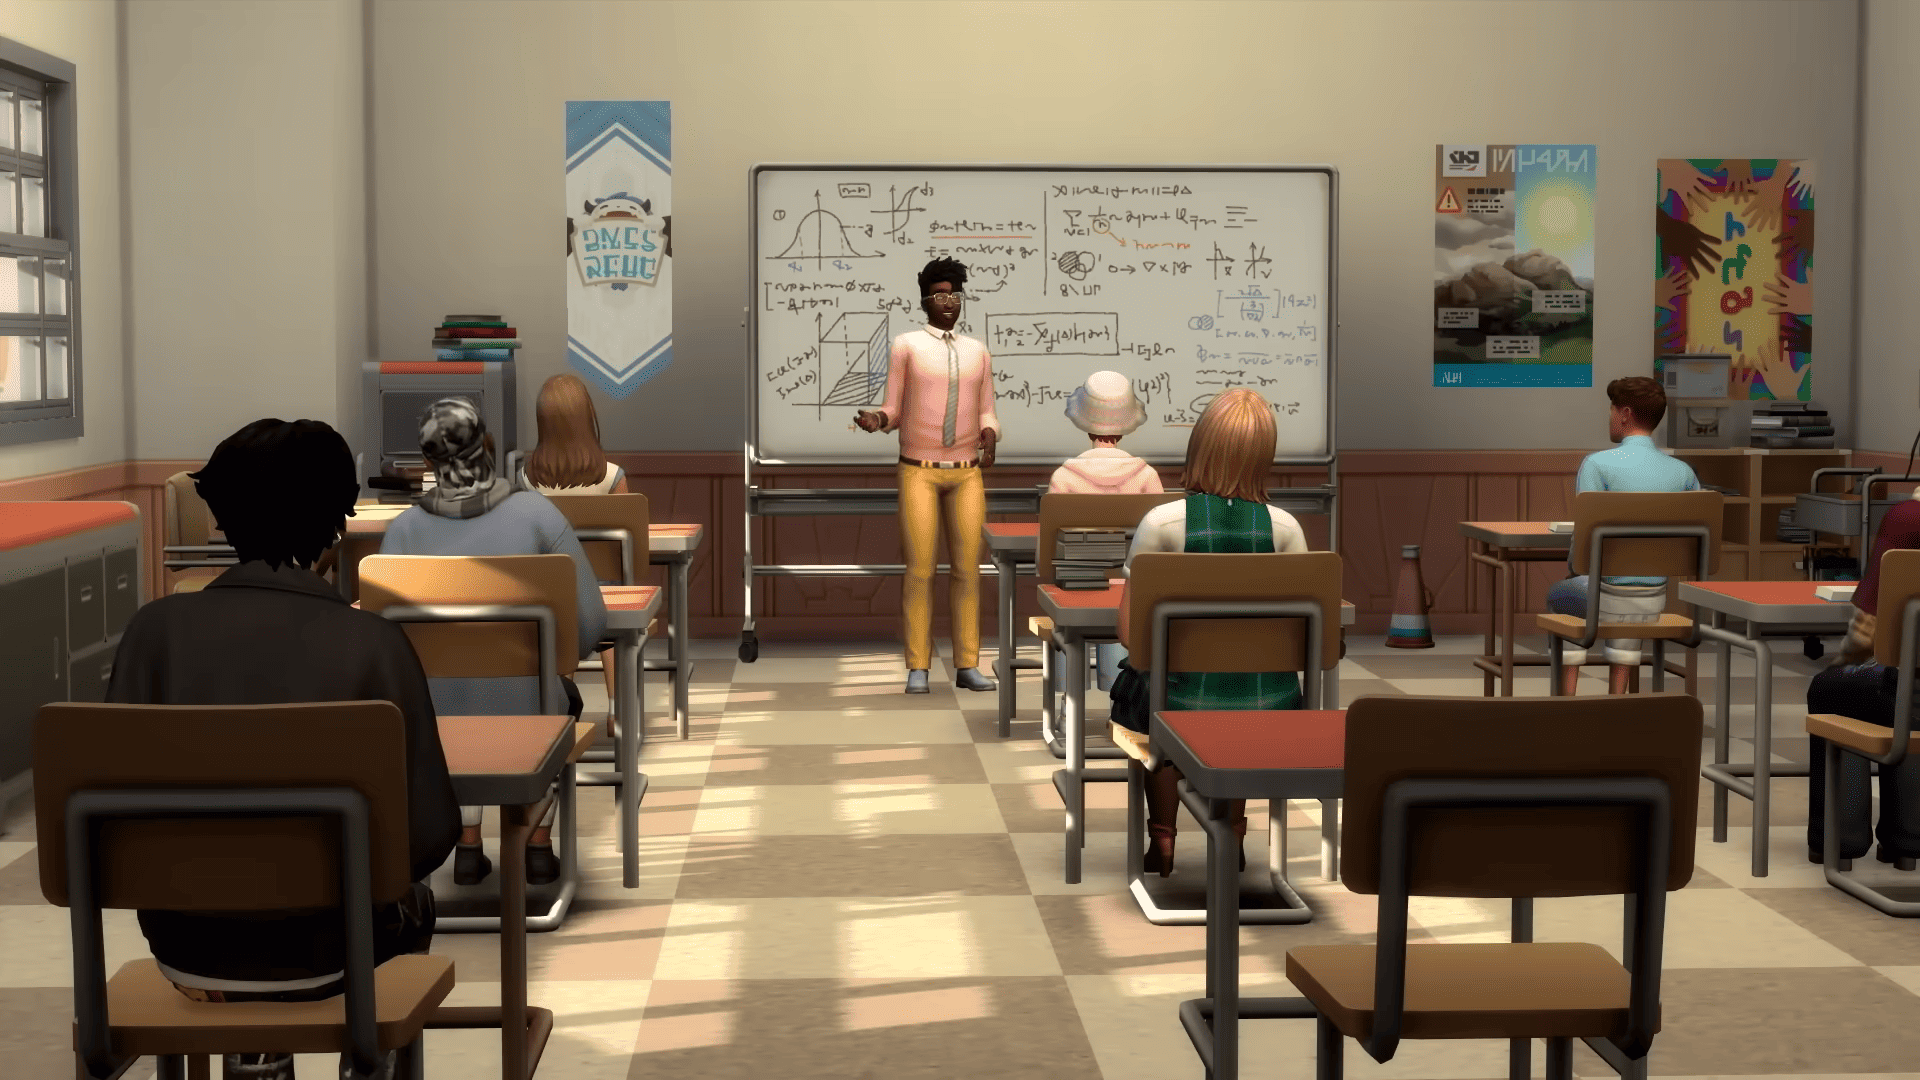 A Sims 3 classroom with people sitting at desks, demonstrating various skills and abilities.